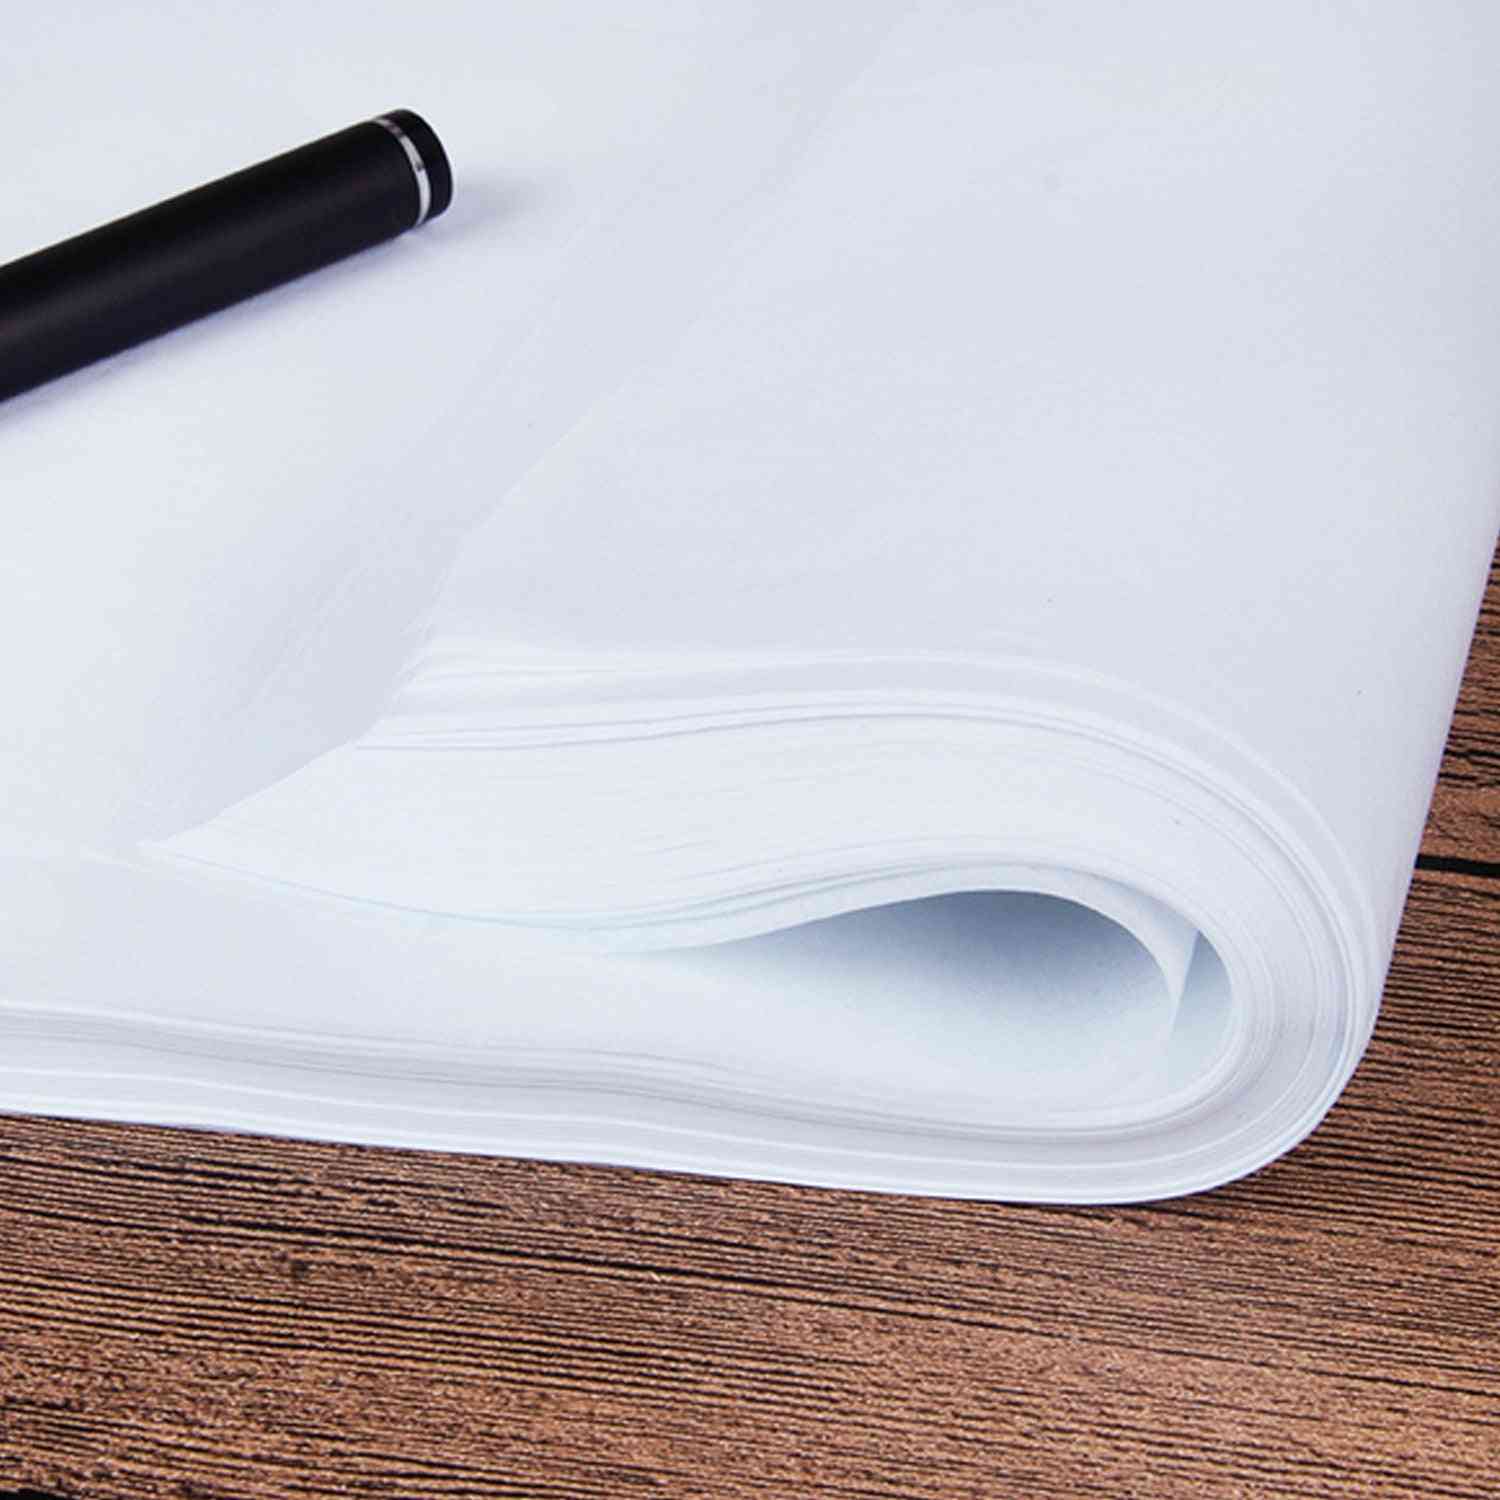 A4 Size Sketching Tracing Paper, Smooth Thick Translucent Diy Copying For Manga Art